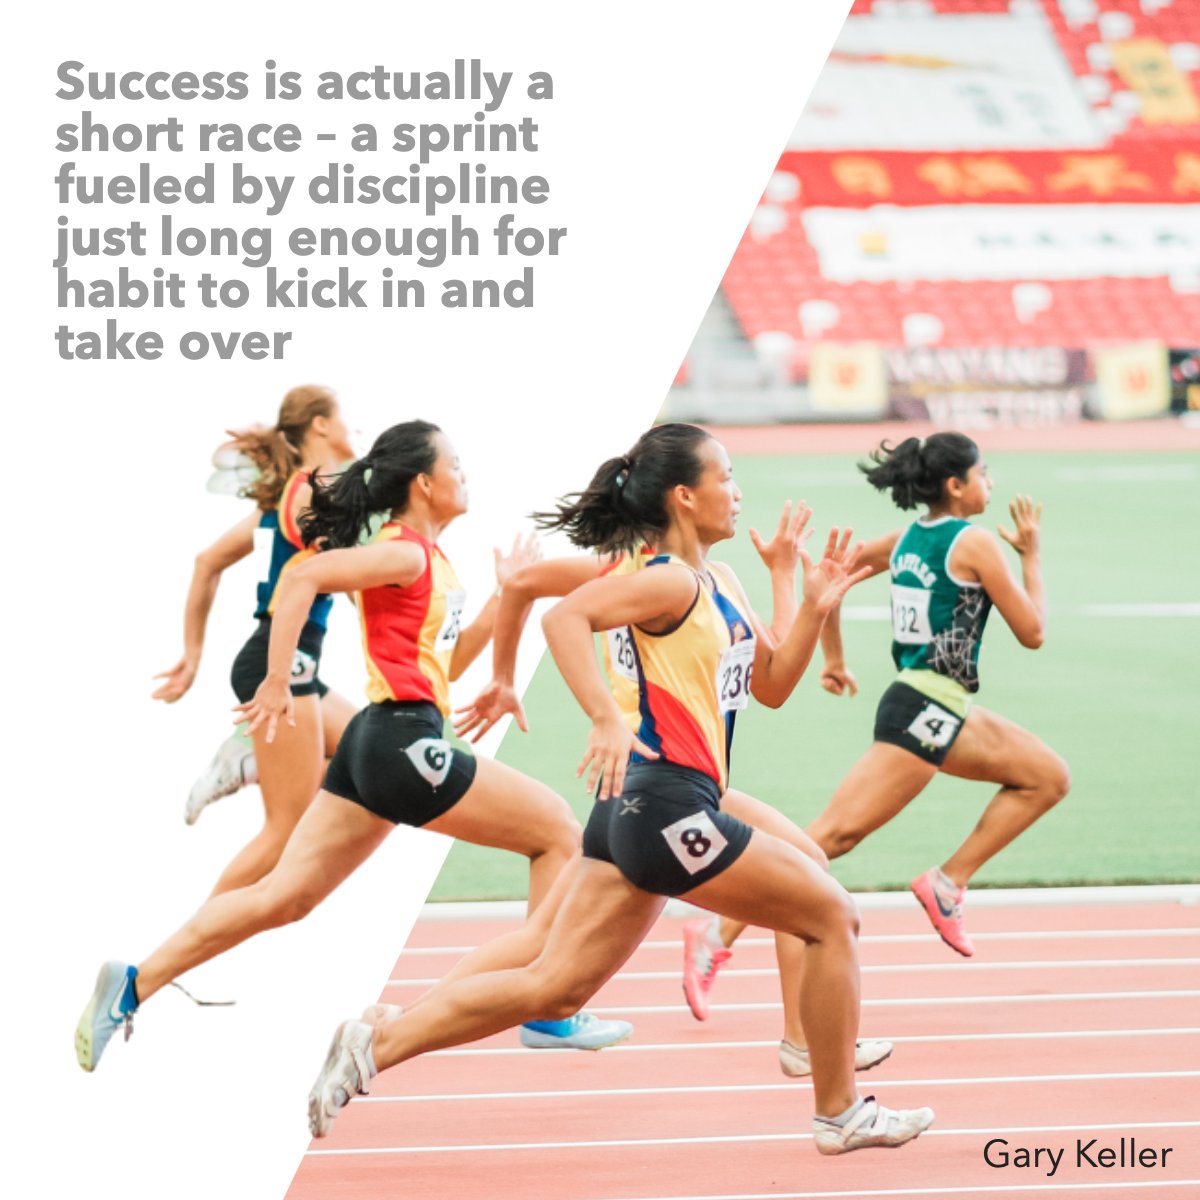 “Success is actually a short race - a sprint fueled by discipline just long enough for habit to kick in and take over.”
— Gary W. Keller

#Motivation     #Inspirational     #quoteoftheday✏️
#Buyingahome #Sellingahome #Wisconsinrealestate